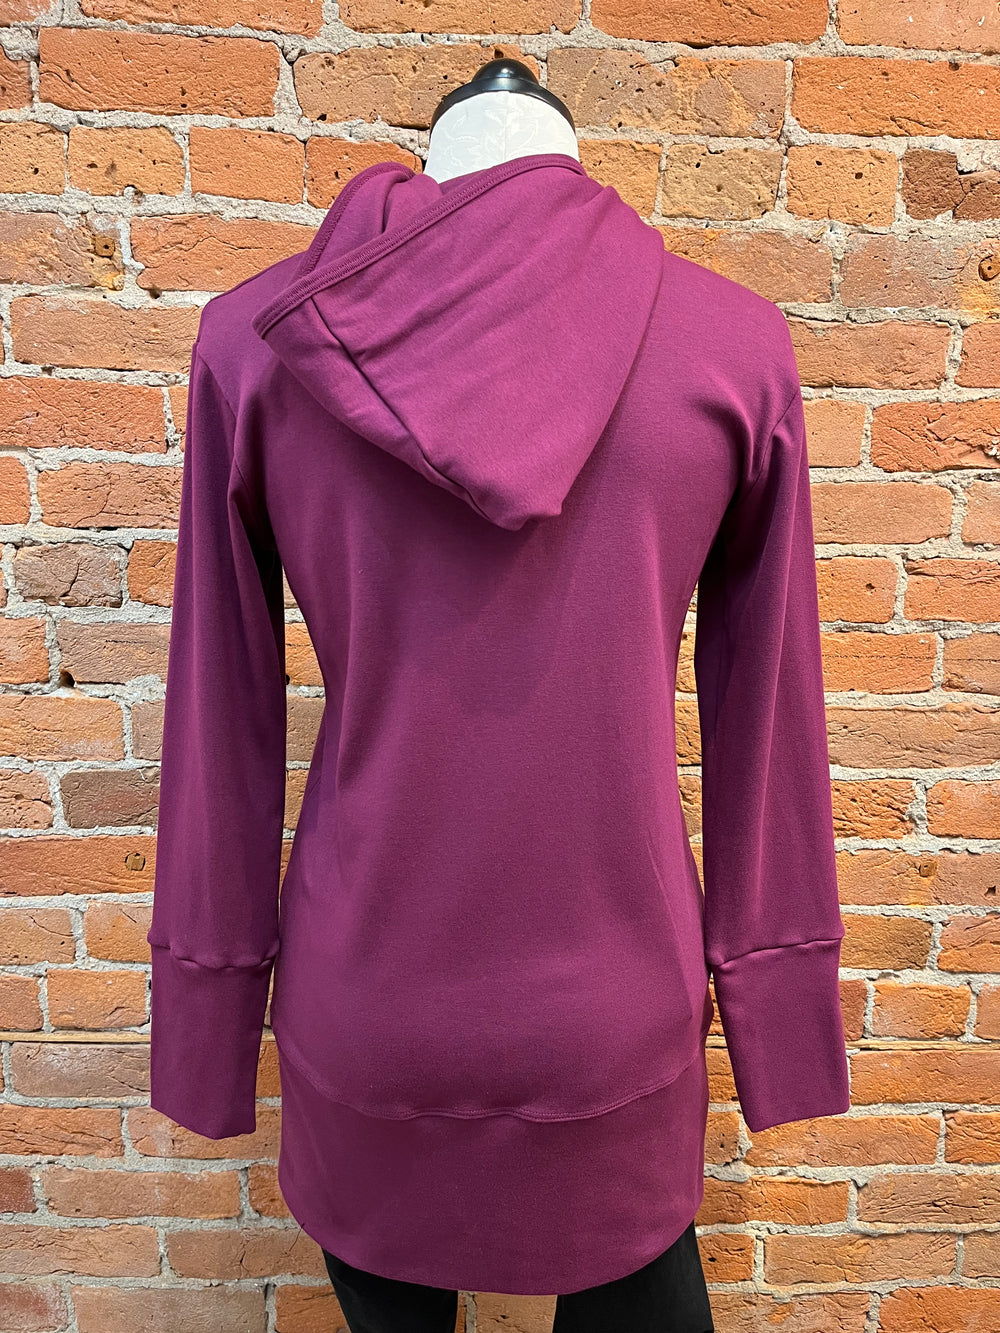 Necessitees hoodie, tunic-length outerwear